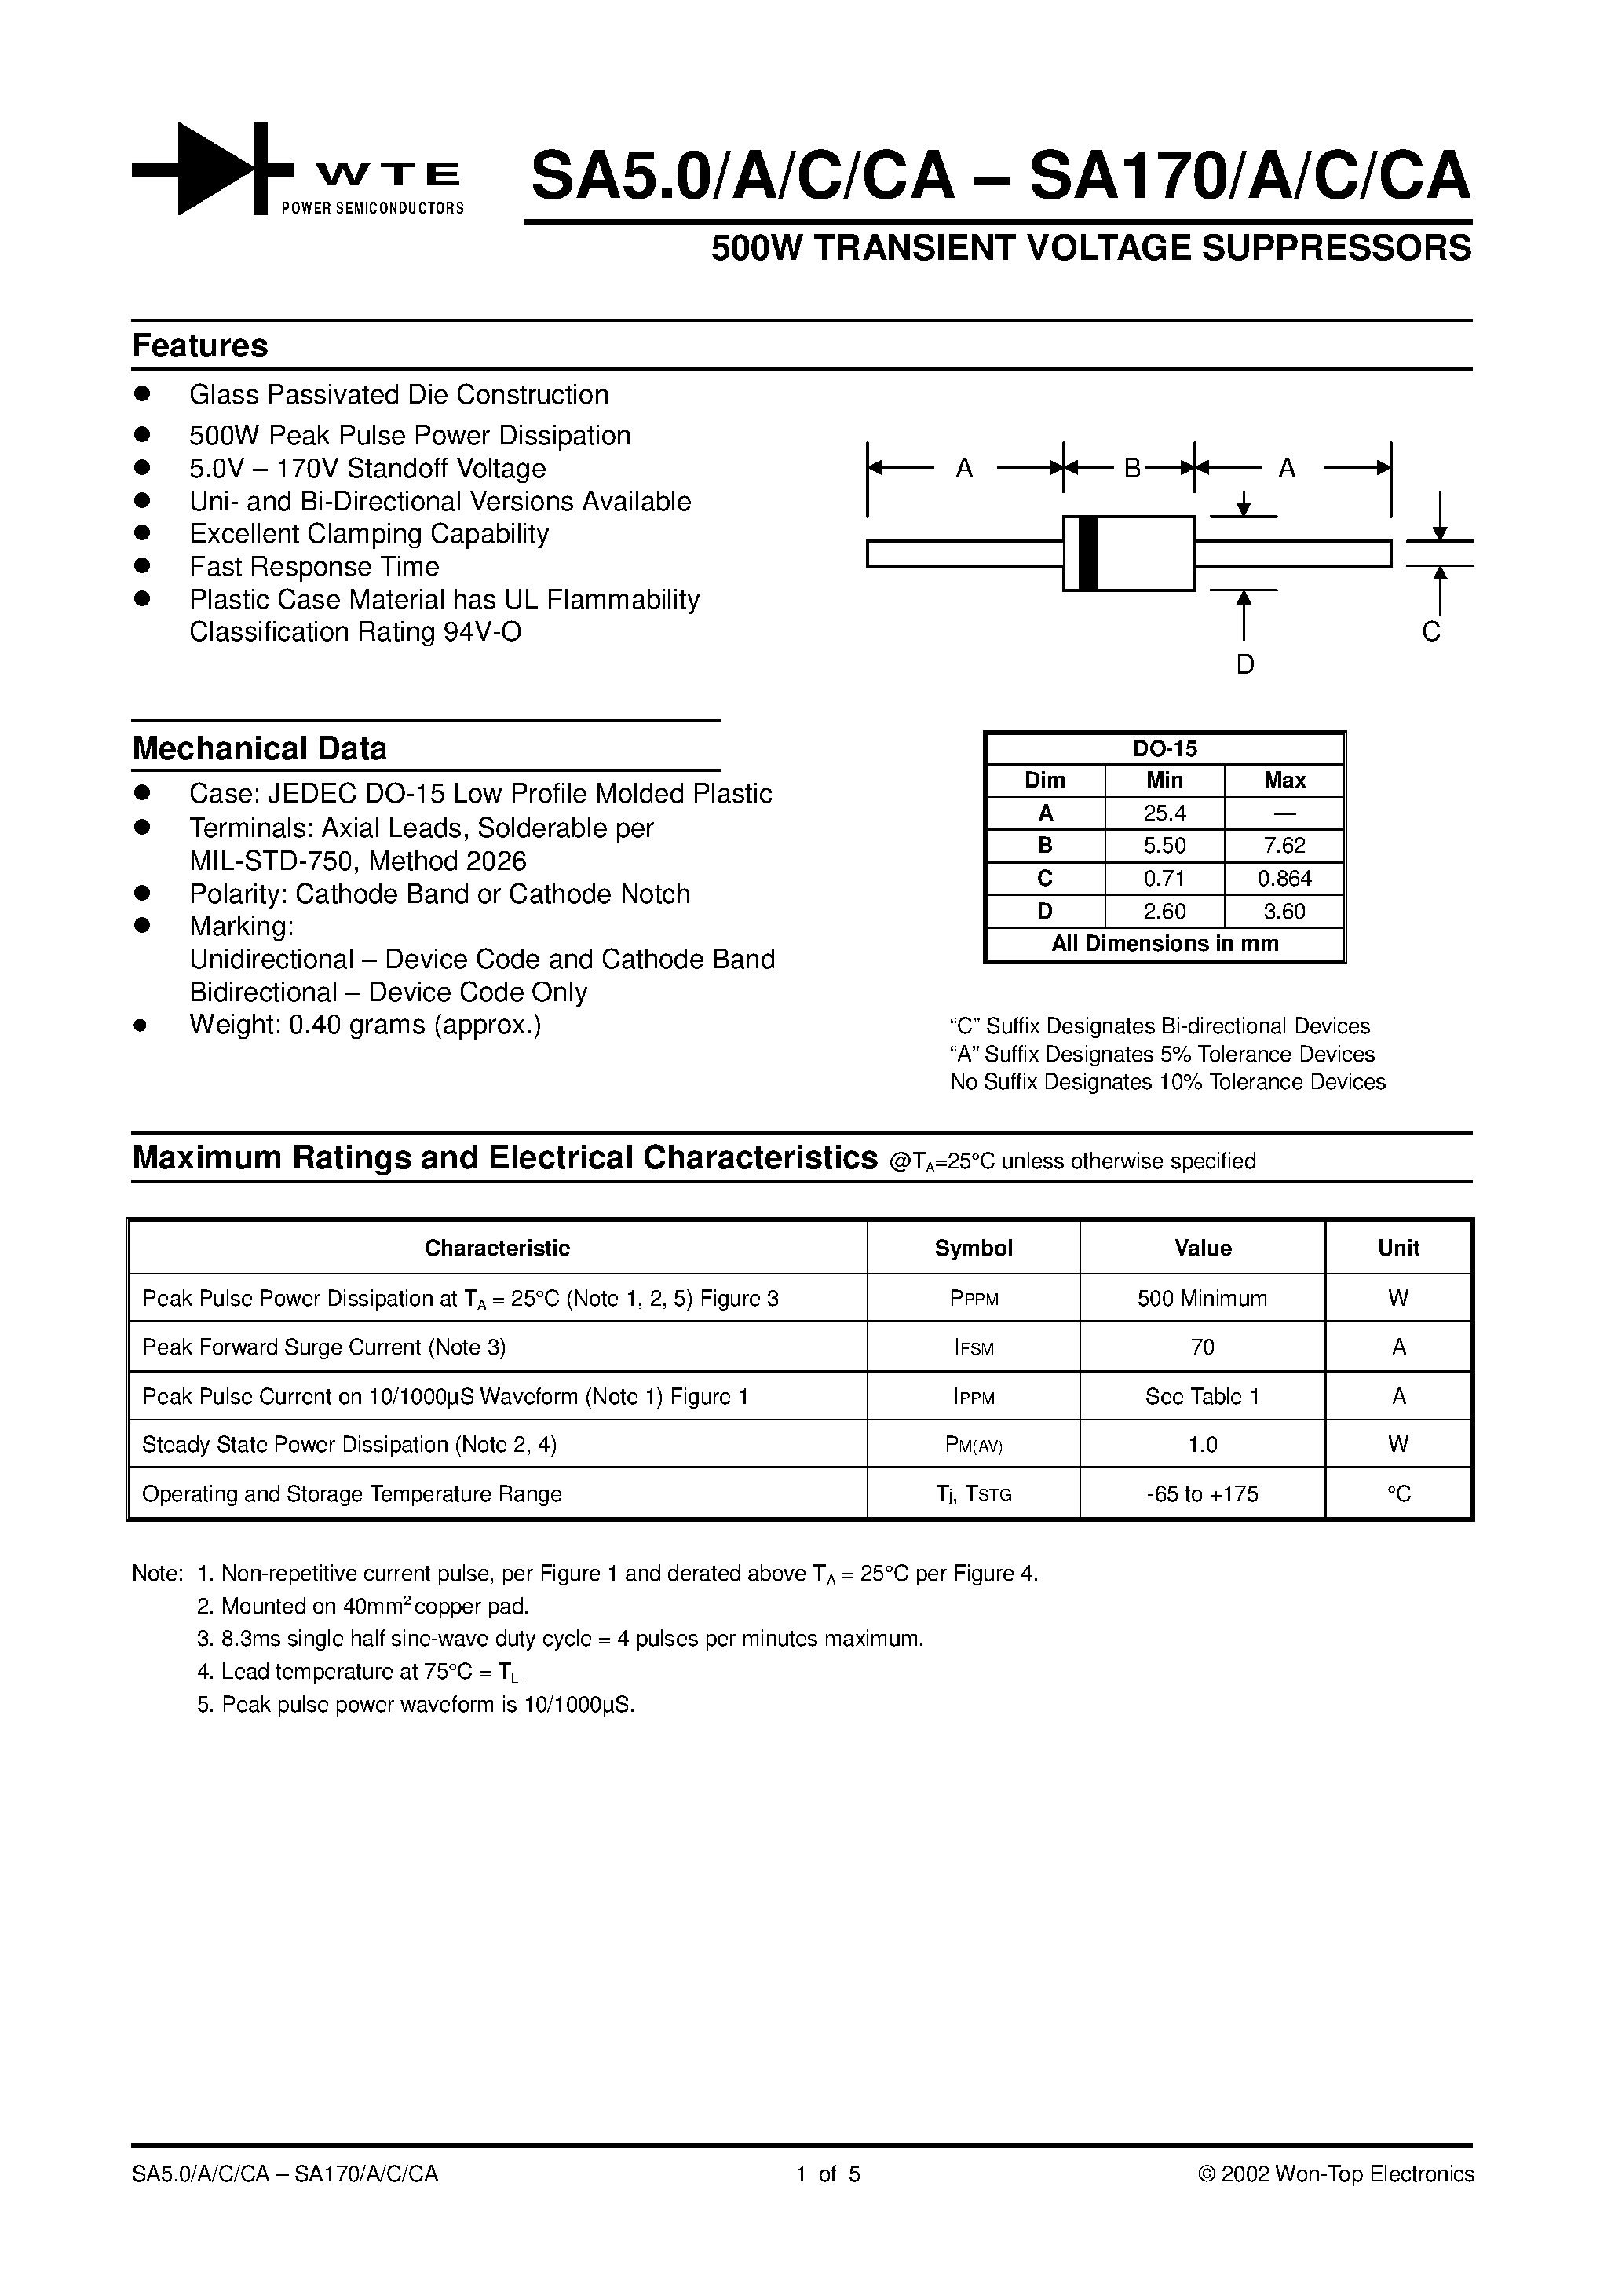 Datasheet SA20A - 500W TRANSIENT VOLTAGE SUPPRESSORS page 1